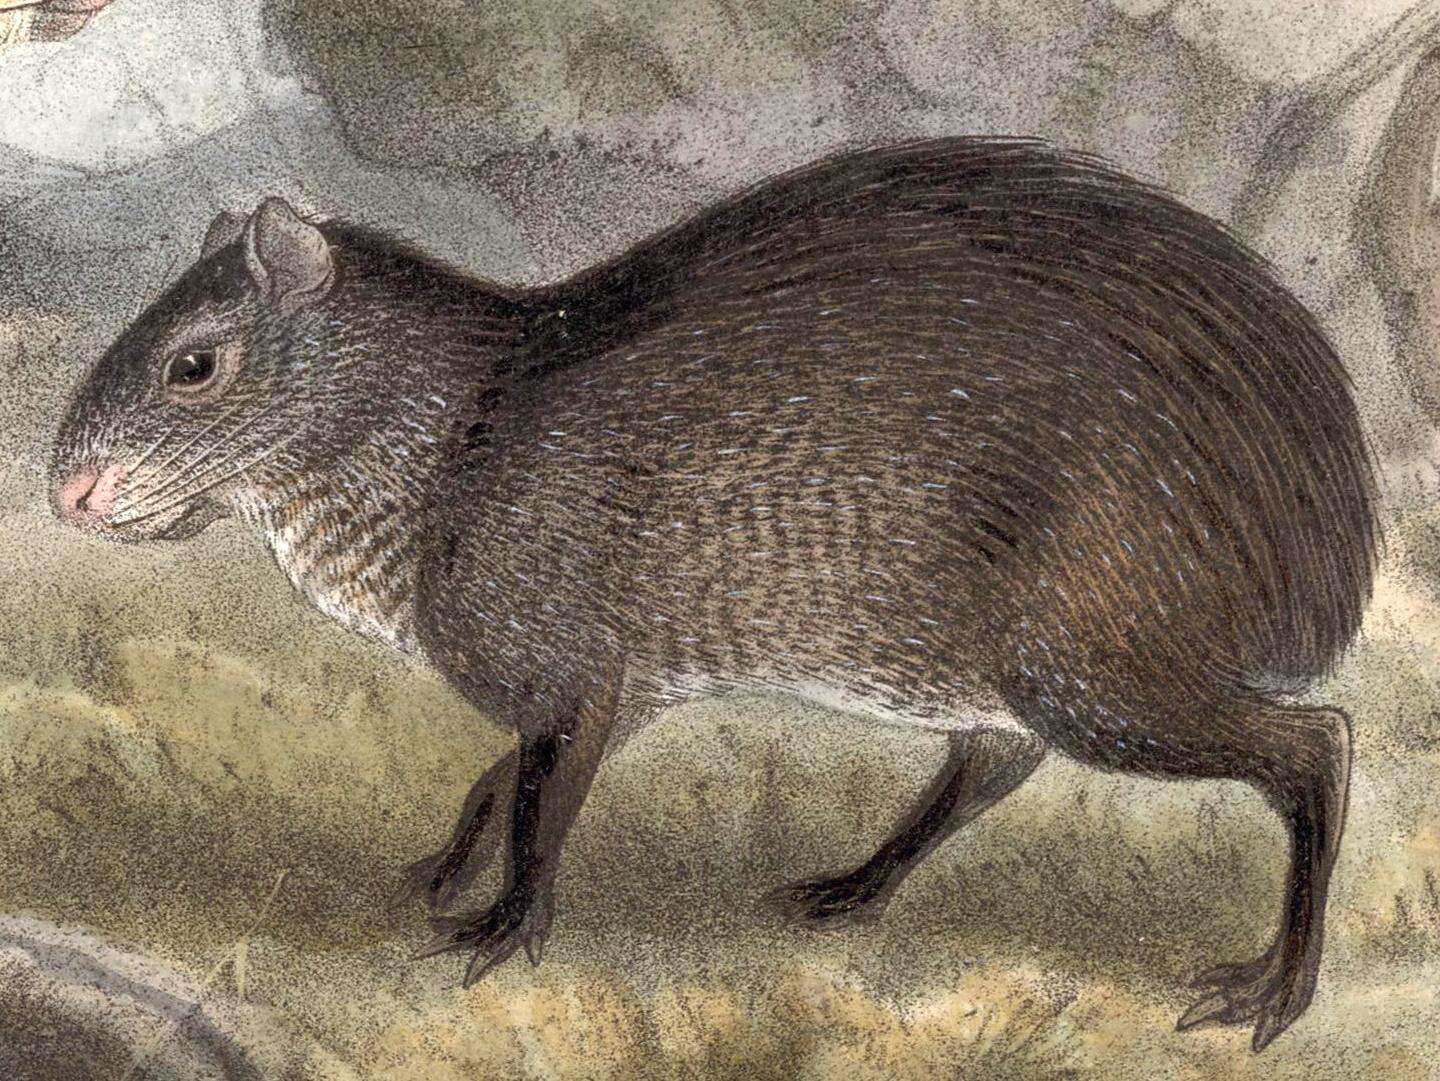 Image of Mexican Agouti